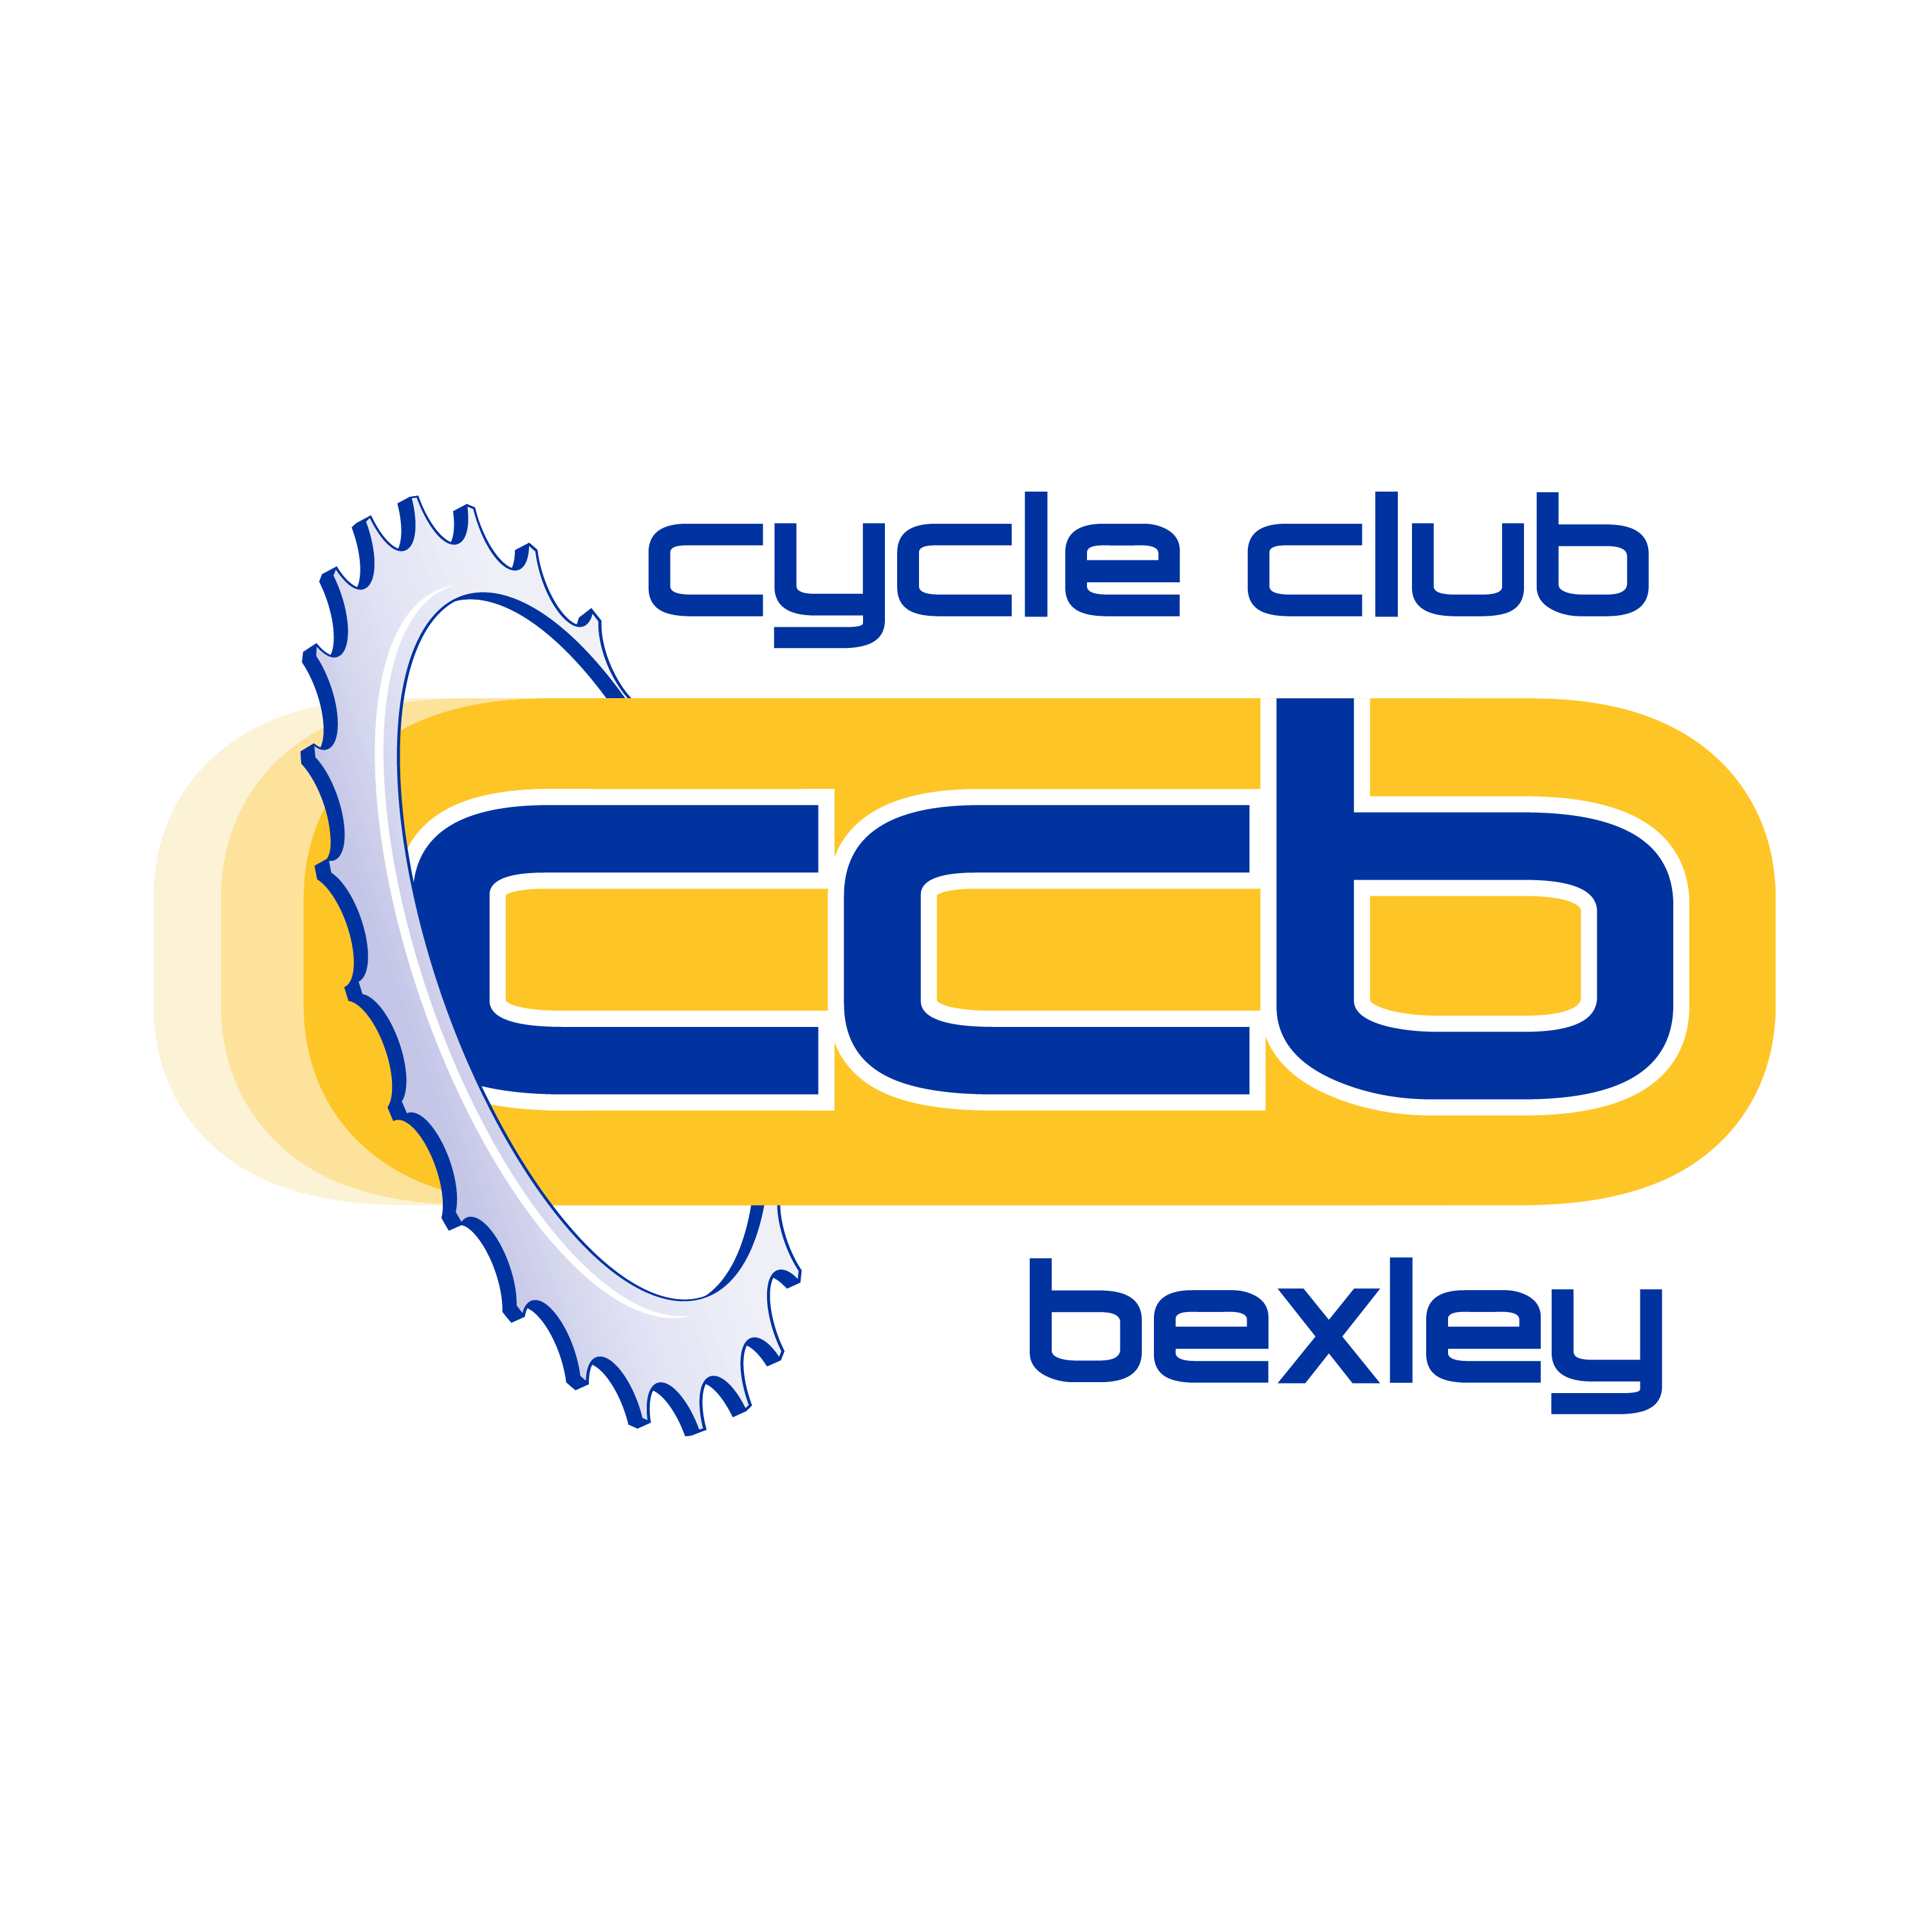 Club Image for CYCLE CLUB BEXLEY